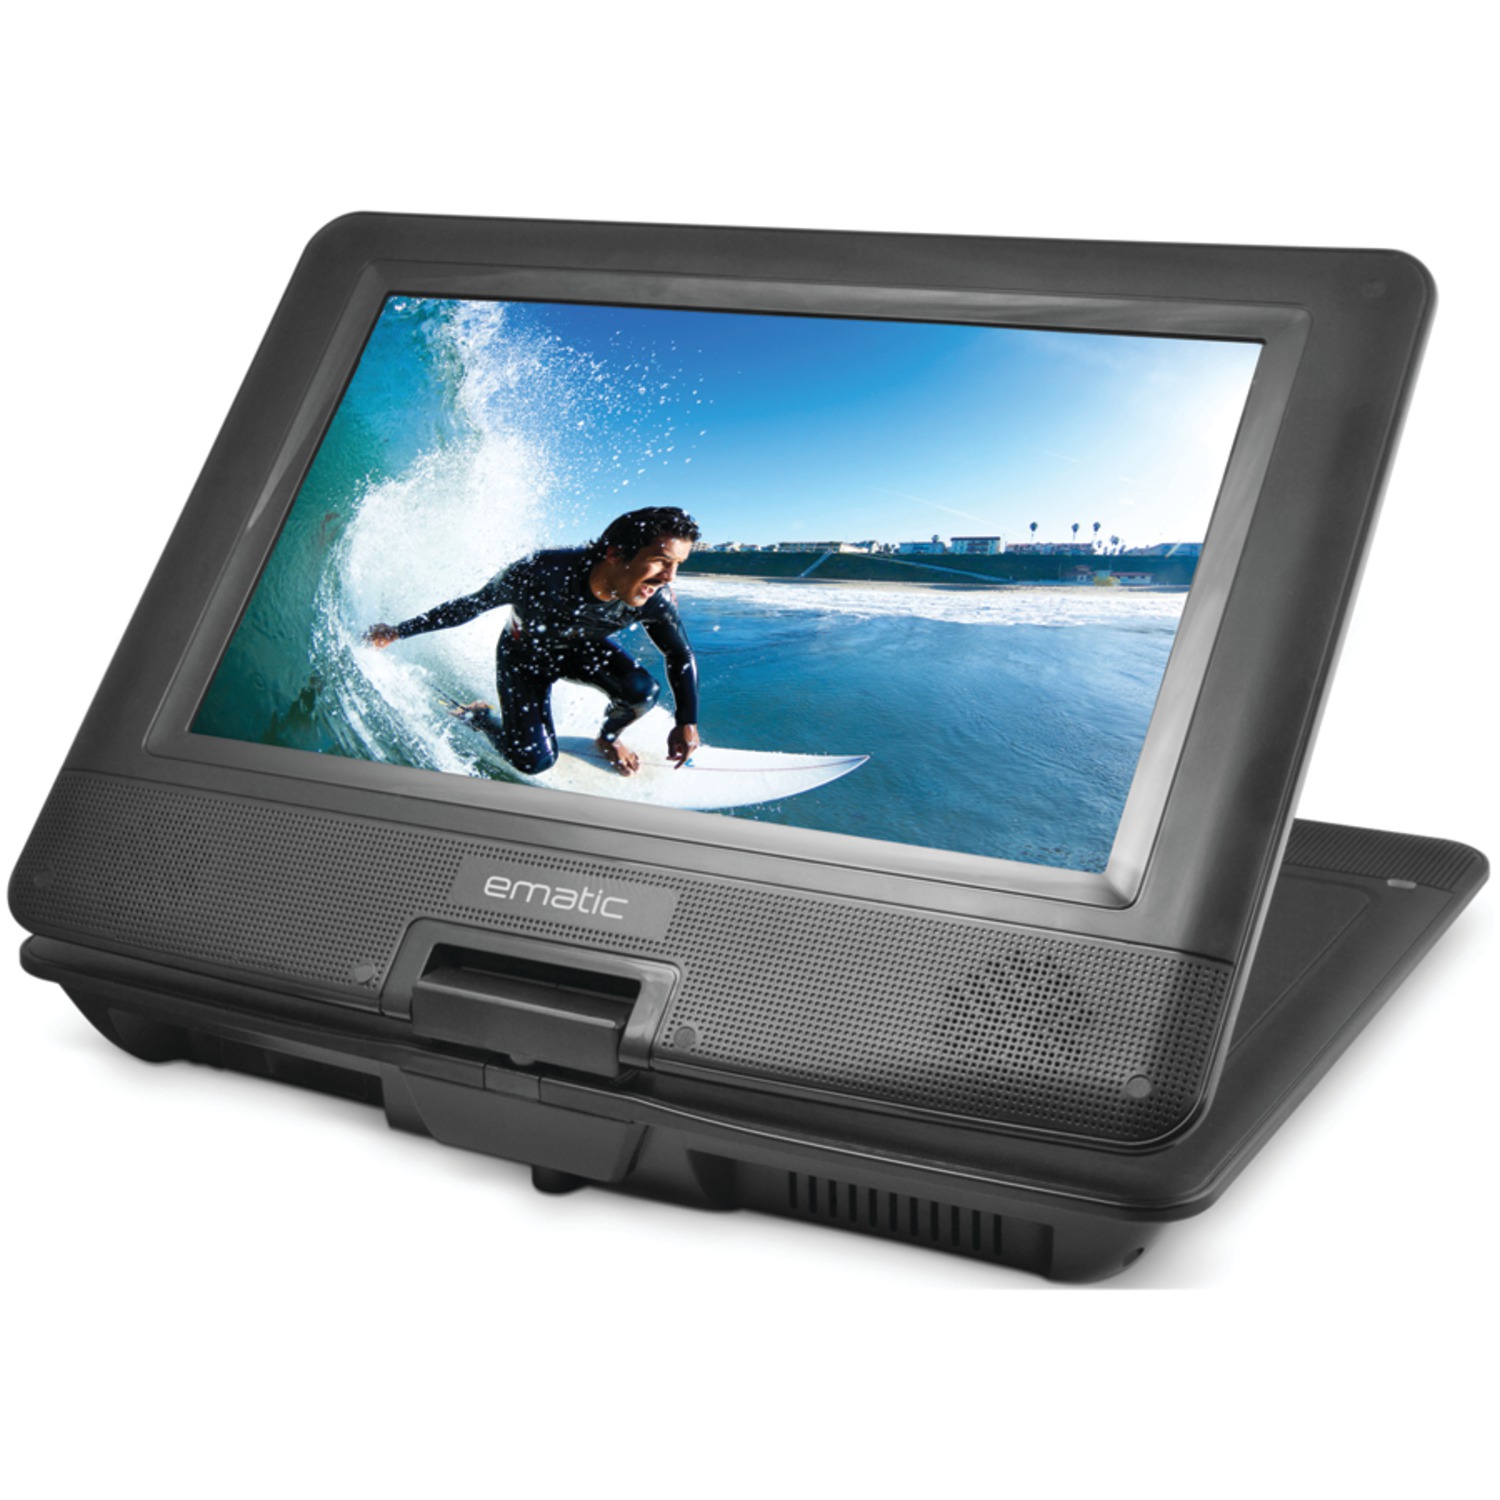 Ematic 10" Portable DVD Player with Headphones and Car-Headrest Mount - EPD116bl - image 3 of 6